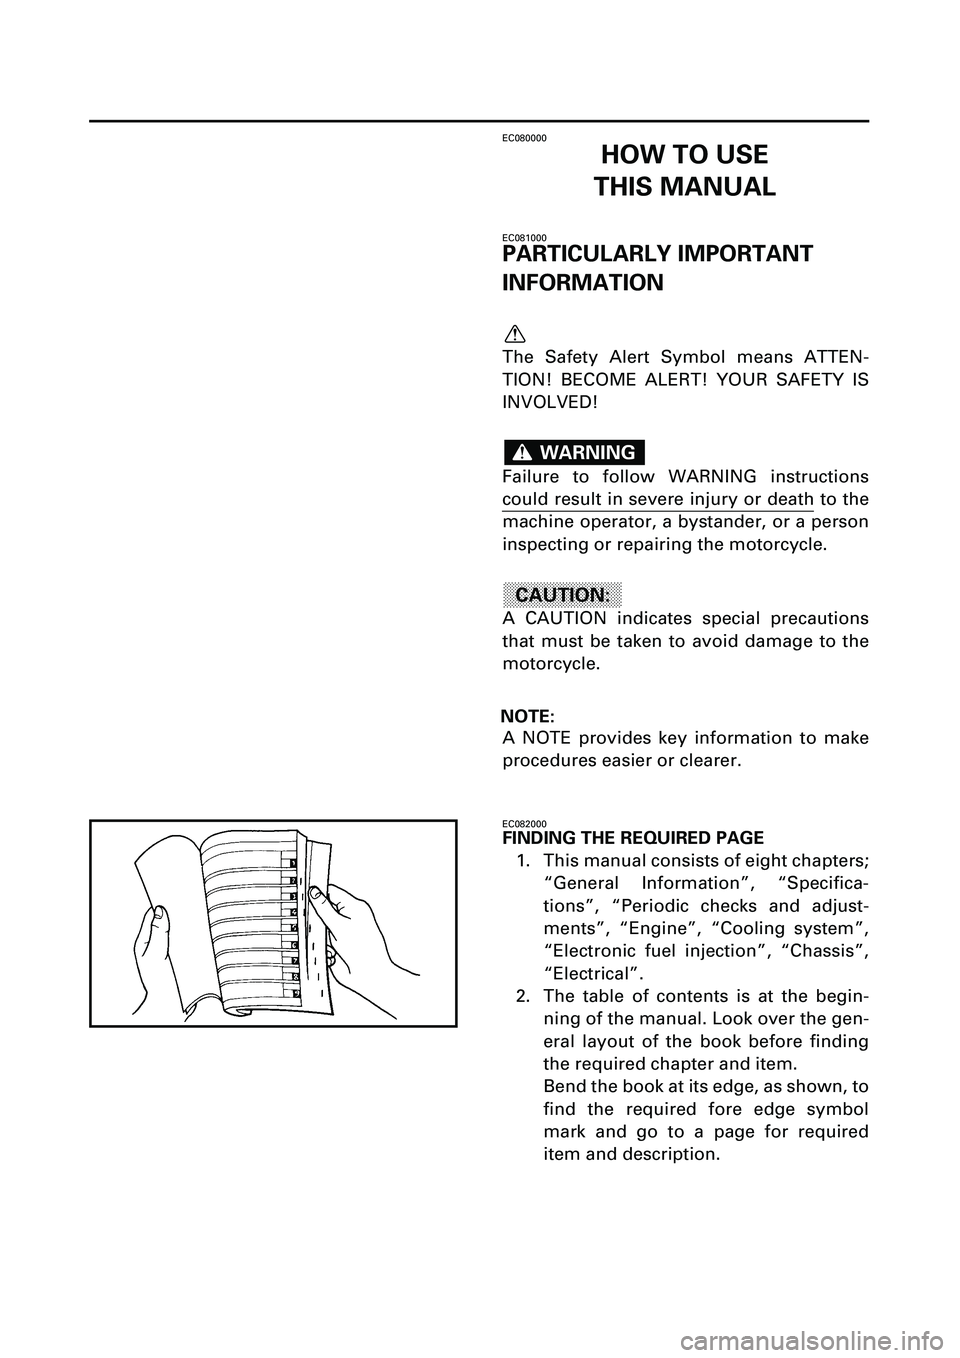 YAMAHA YZF-R7 1999  Owners Manual  
EC080000 
HOW TO USE
THIS MANUAL 
EC081000 
PARTICULARLY IMPORTANT 
INFORMATION 
The Safety Alert Symbol means ATTEN-
TION! BECOME ALERT! YOUR SAFETY IS
INVOLVED!
Failure to follow WARNING instructi